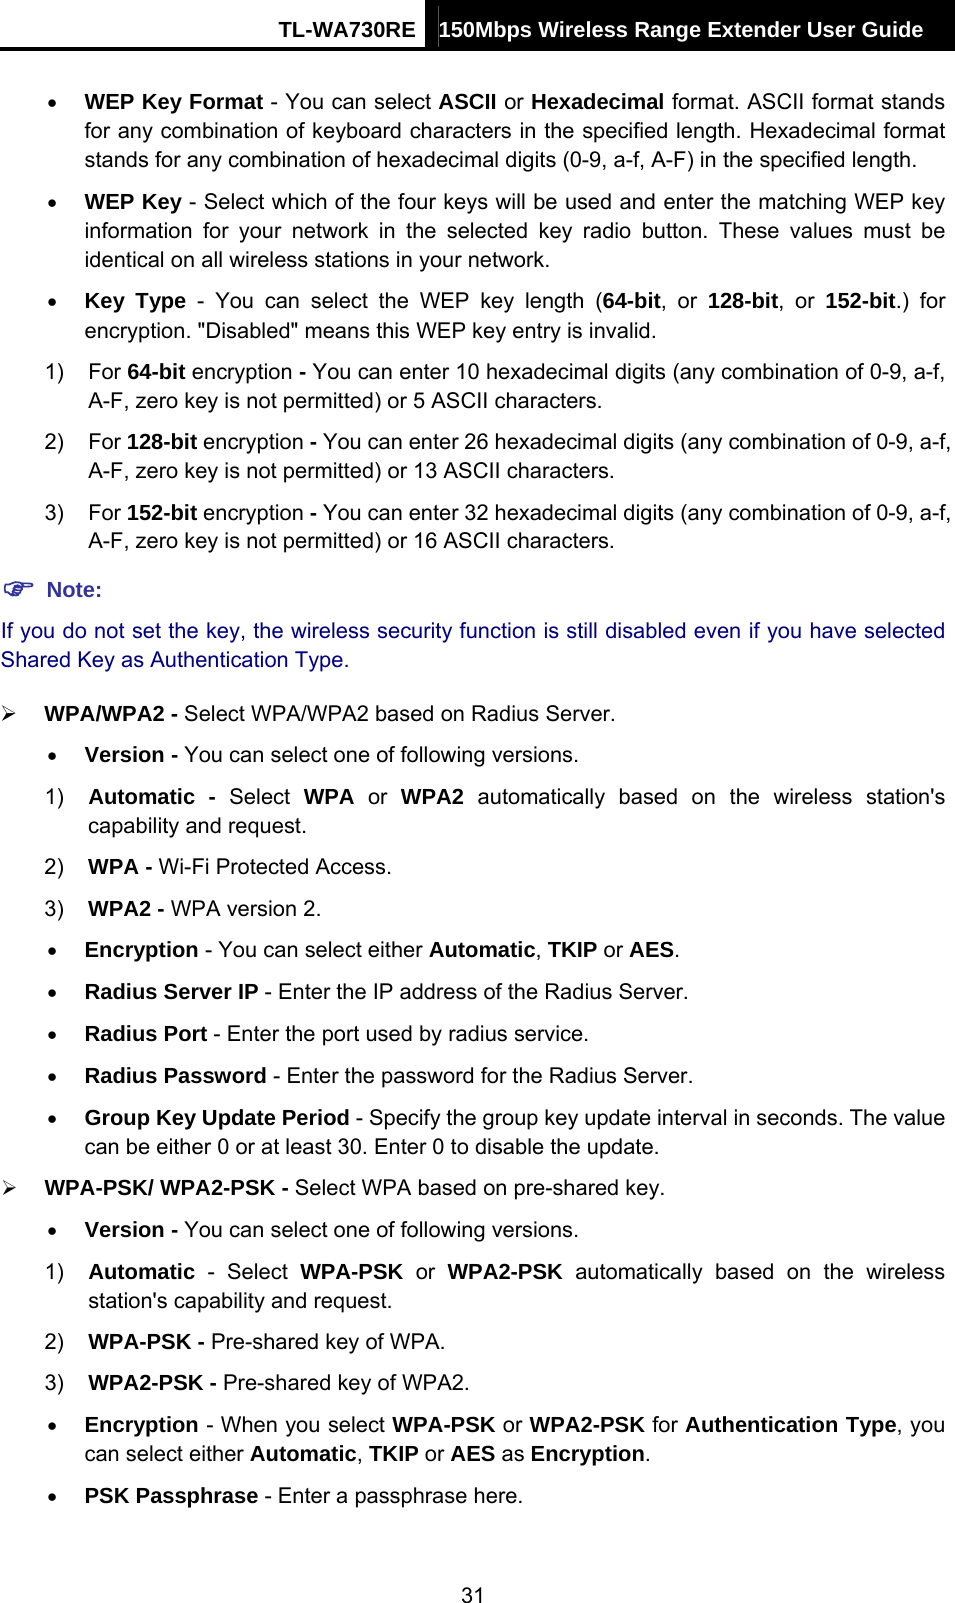 TL-WA730RE 150Mbps Wireless Range Extender User Guide  • WEP Key Format - You can select ASCII or Hexadecimal format. ASCII format stands for any combination of keyboard characters in the specified length. Hexadecimal format stands for any combination of hexadecimal digits (0-9, a-f, A-F) in the specified length. • WEP Key - Select which of the four keys will be used and enter the matching WEP key information for your network in the selected key radio button. These values must be identical on all wireless stations in your network.   • Key Type - You can select the WEP key length (64-bit, or 128-bit, or 152-bit.) for encryption. &quot;Disabled&quot; means this WEP key entry is invalid. 1) For 64-bit encryption - You can enter 10 hexadecimal digits (any combination of 0-9, a-f, A-F, zero key is not permitted) or 5 ASCII characters.   2) For 128-bit encryption - You can enter 26 hexadecimal digits (any combination of 0-9, a-f, A-F, zero key is not permitted) or 13 ASCII characters.   3) For 152-bit encryption - You can enter 32 hexadecimal digits (any combination of 0-9, a-f, A-F, zero key is not permitted) or 16 ASCII characters.   ) Note: If you do not set the key, the wireless security function is still disabled even if you have selected Shared Key as Authentication Type.   ¾ WPA/WPA2 - Select WPA/WPA2 based on Radius Server. • Version - You can select one of following versions. 1)  Automatic - Select WPA or WPA2 automatically based on the wireless station&apos;s capability and request.   2)  WPA - Wi-Fi Protected Access.   3)  WPA2 - WPA version 2.   • Encryption - You can select either Automatic, TKIP or AES. • Radius Server IP - Enter the IP address of the Radius Server. • Radius Port - Enter the port used by radius service. • Radius Password - Enter the password for the Radius Server. • Group Key Update Period - Specify the group key update interval in seconds. The value can be either 0 or at least 30. Enter 0 to disable the update. ¾ WPA-PSK/ WPA2-PSK - Select WPA based on pre-shared key. • Version - You can select one of following versions. 1)  Automatic - Select WPA-PSK or WPA2-PSK automatically based on the wireless station&apos;s capability and request.   2)  WPA-PSK - Pre-shared key of WPA.   3)  WPA2-PSK - Pre-shared key of WPA2.   • Encryption - When you select WPA-PSK or WPA2-PSK for Authentication Type, you can select either Automatic, TKIP or AES as Encryption. • PSK Passphrase - Enter a passphrase here. 31 